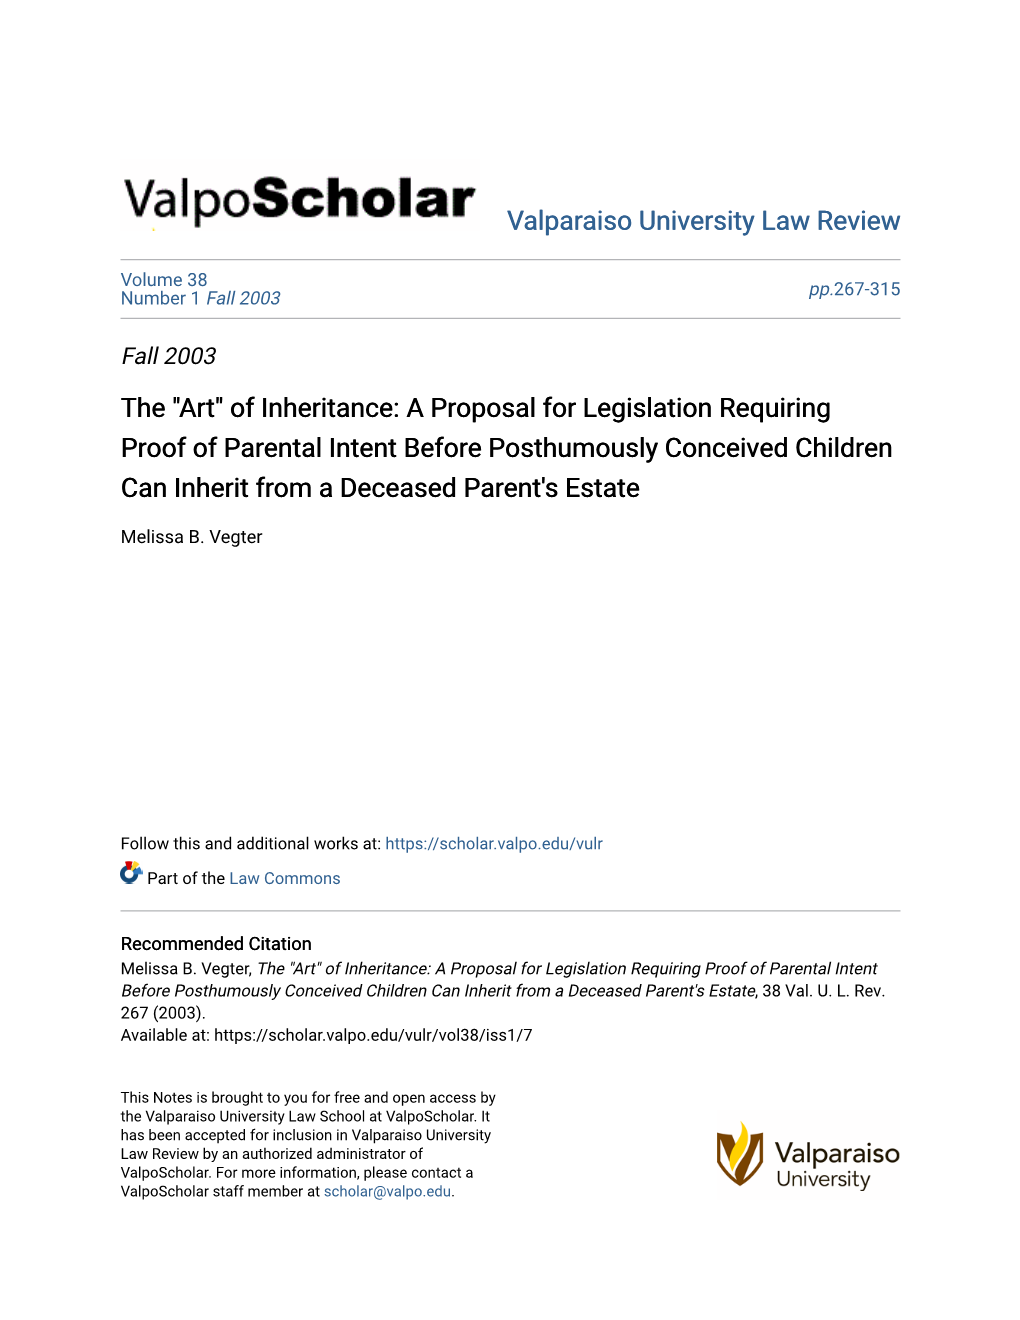 Of Inheritance: a Proposal for Legislation Requiring Proof of Parental Intent Before Posthumously Conceived Children Can Inherit from a Deceased Parent's Estate